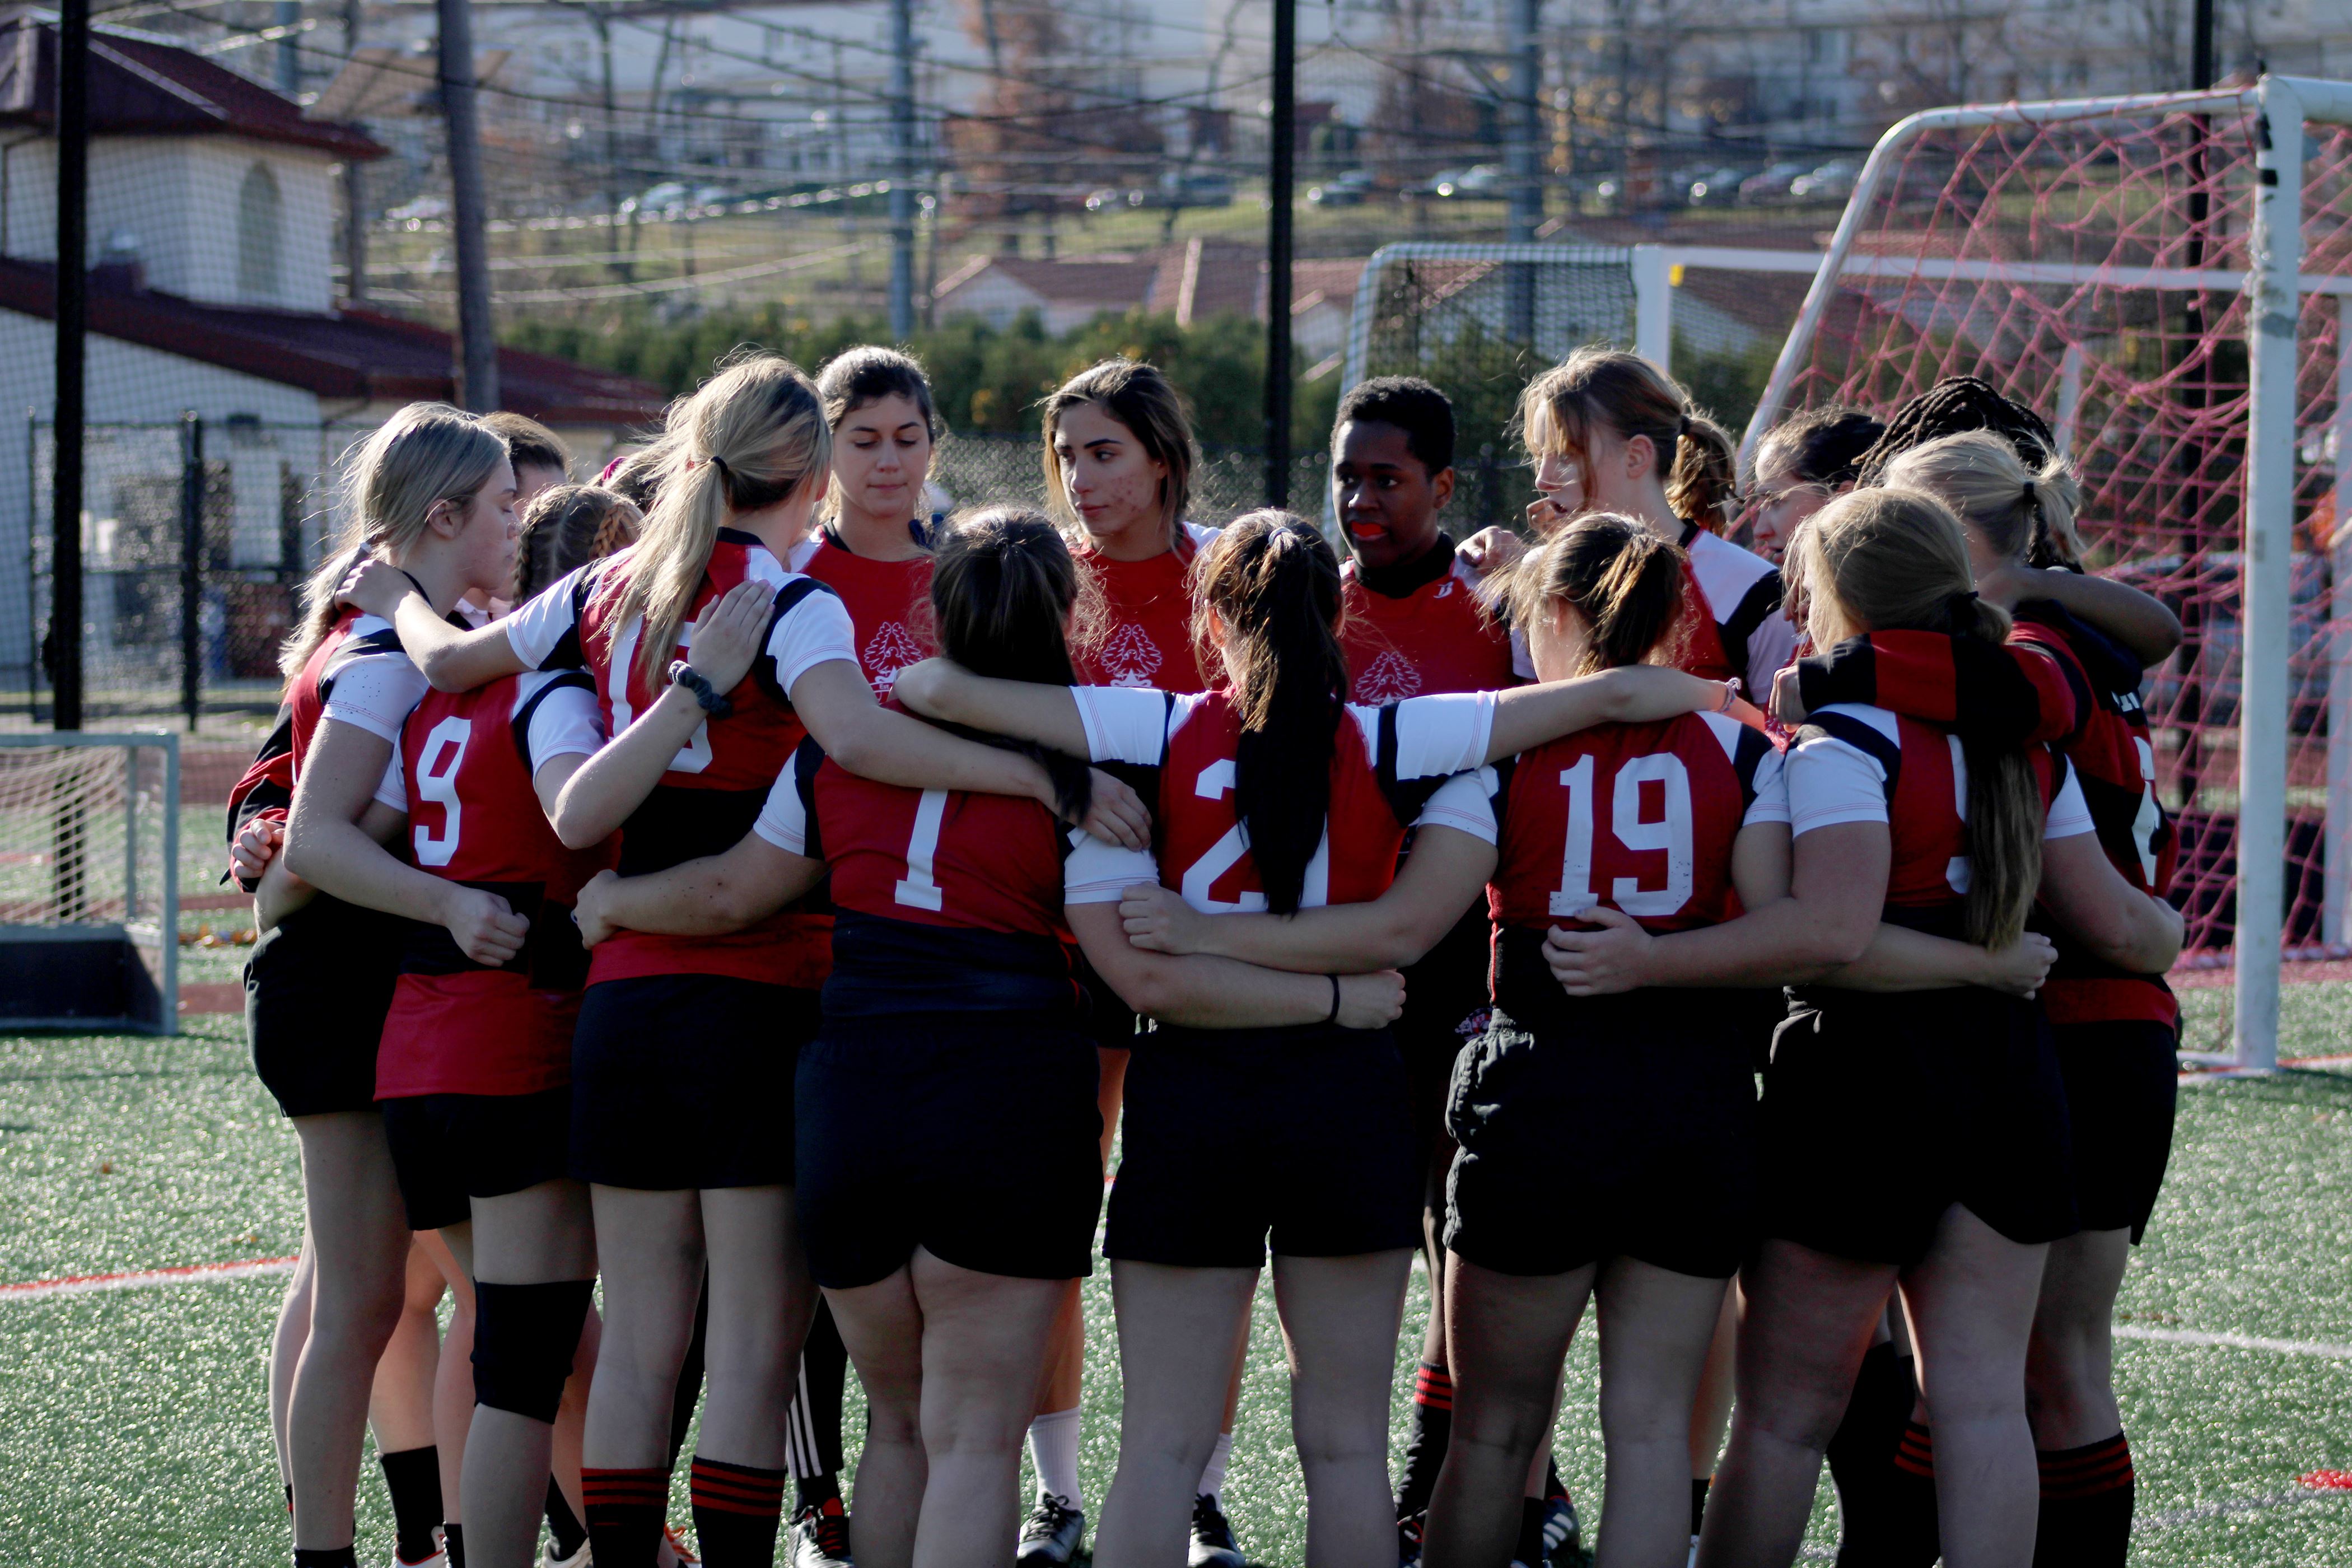 Montclair State women's rugby players lock arms and share motivational words before the start of their intra-squad scrimmage. Corey Annan | The Montclarion